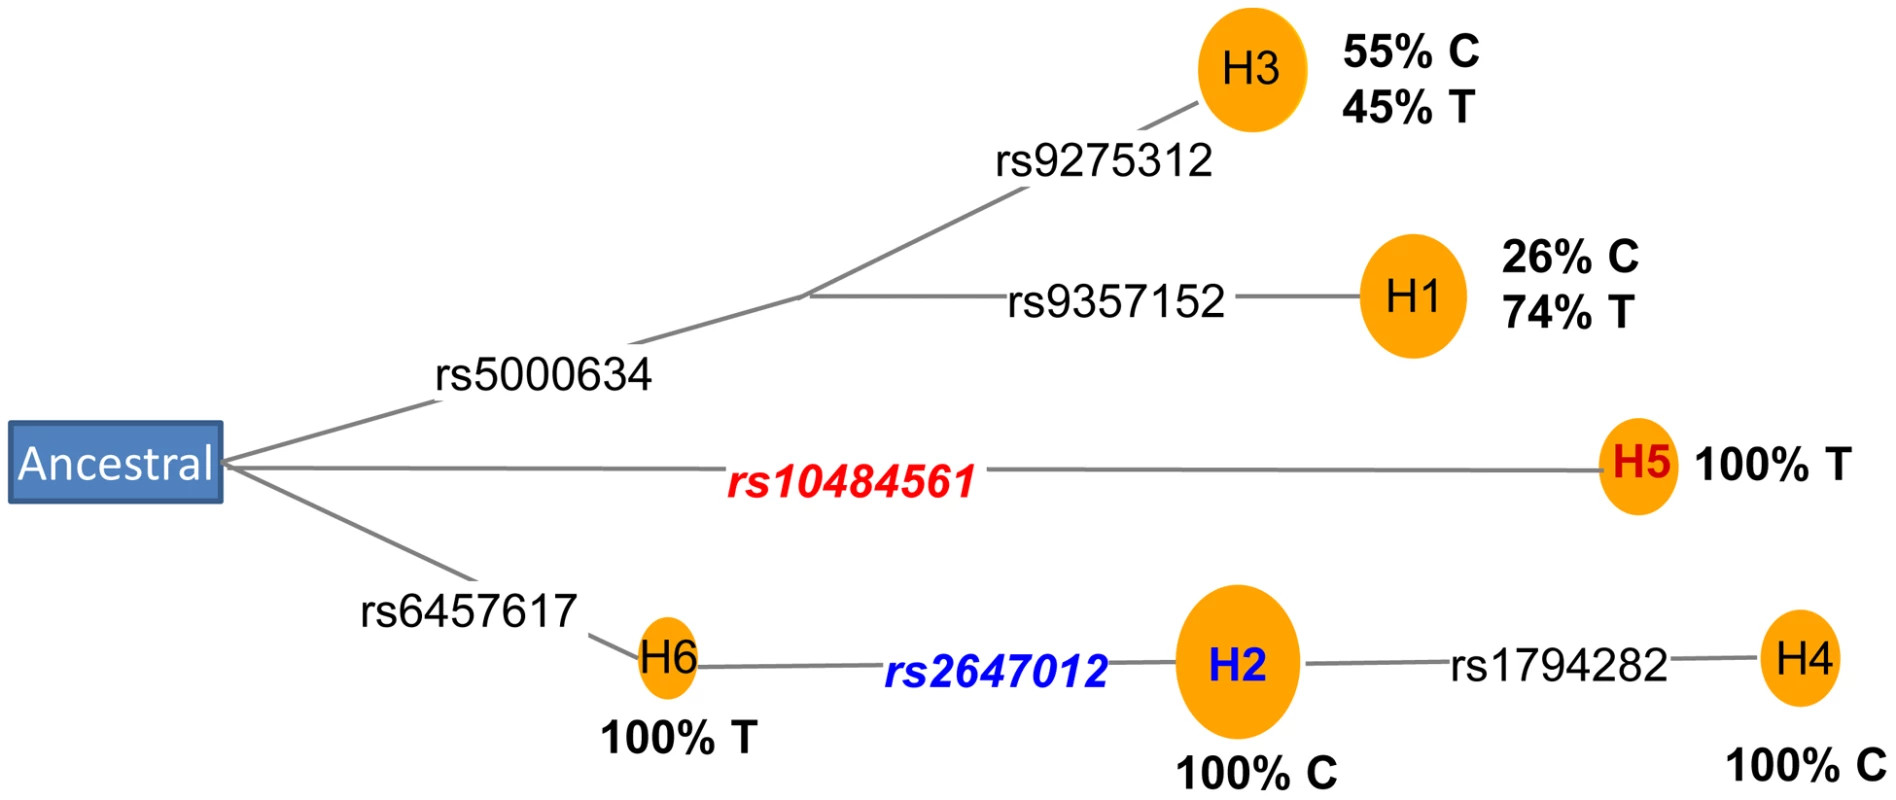 Coalescence analysis of rs2647012 and rs10484561.